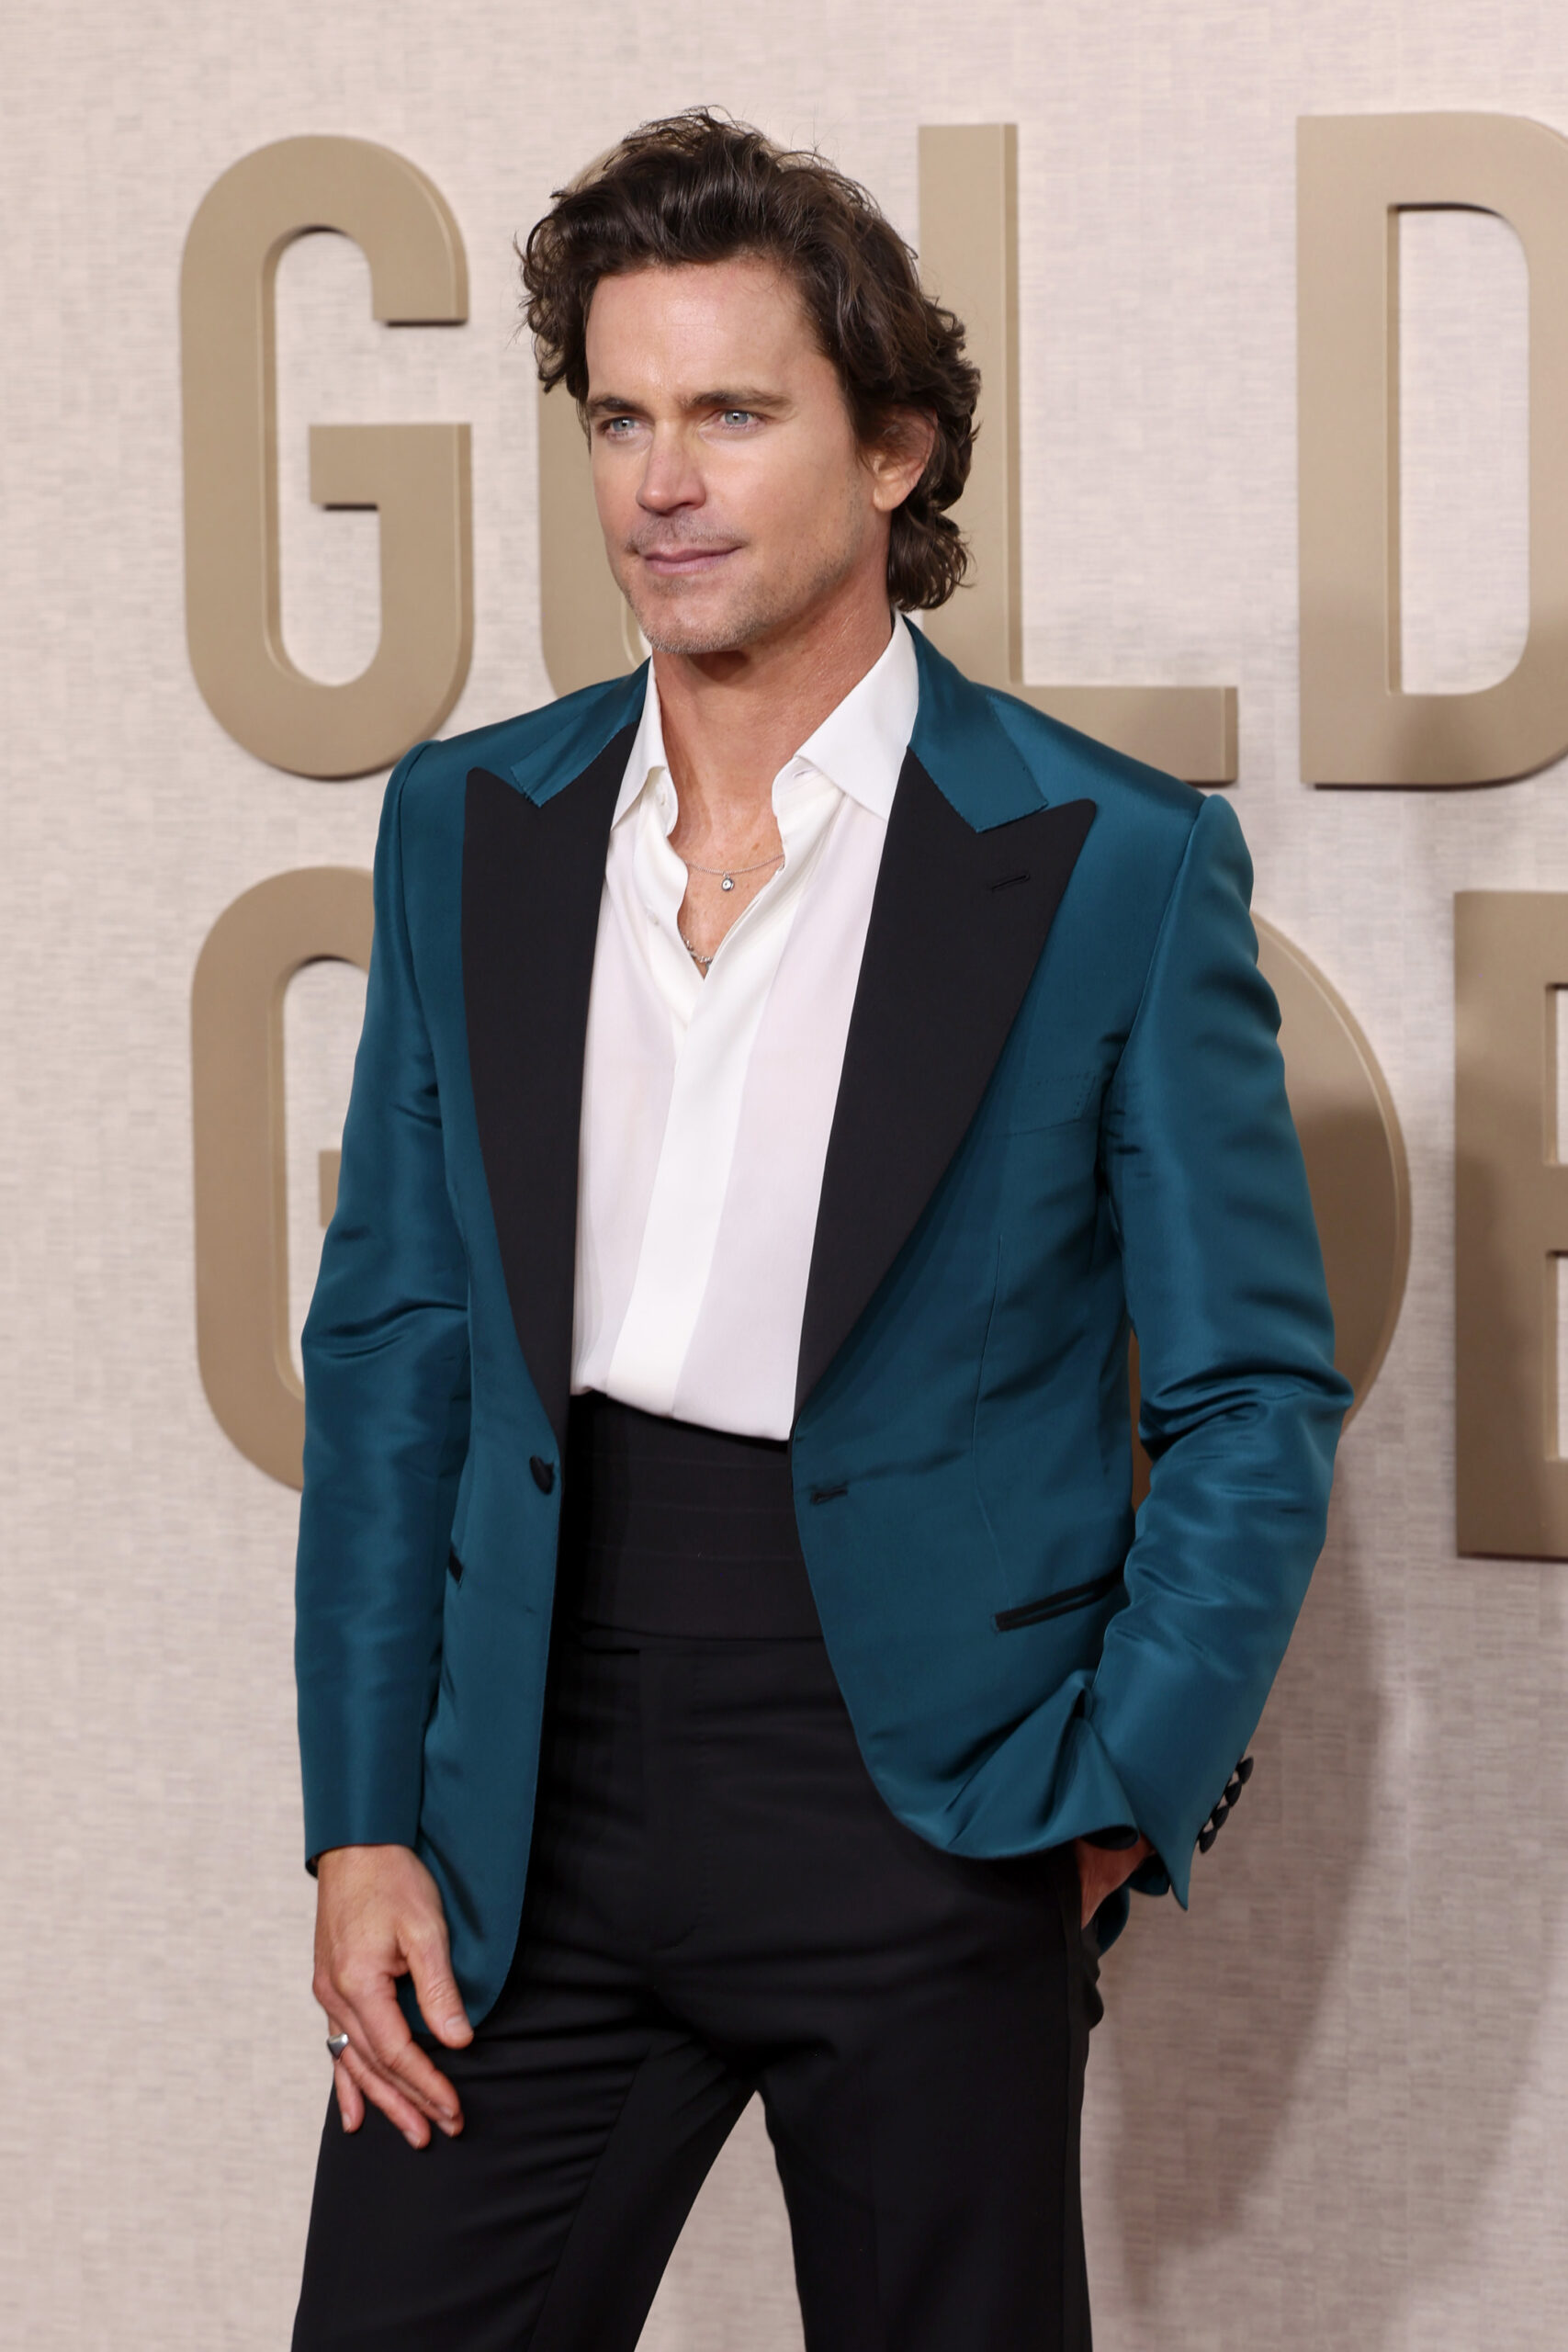 BEVERLY HILLS, CALIFORNIA - JANUARY 07: Matt Bomer attends the 81st Annual Golden Globe Awards at The Beverly Hilton on January 07, 2024 in Beverly Hills, California. (Photo by Kevin Mazur/Getty Images)